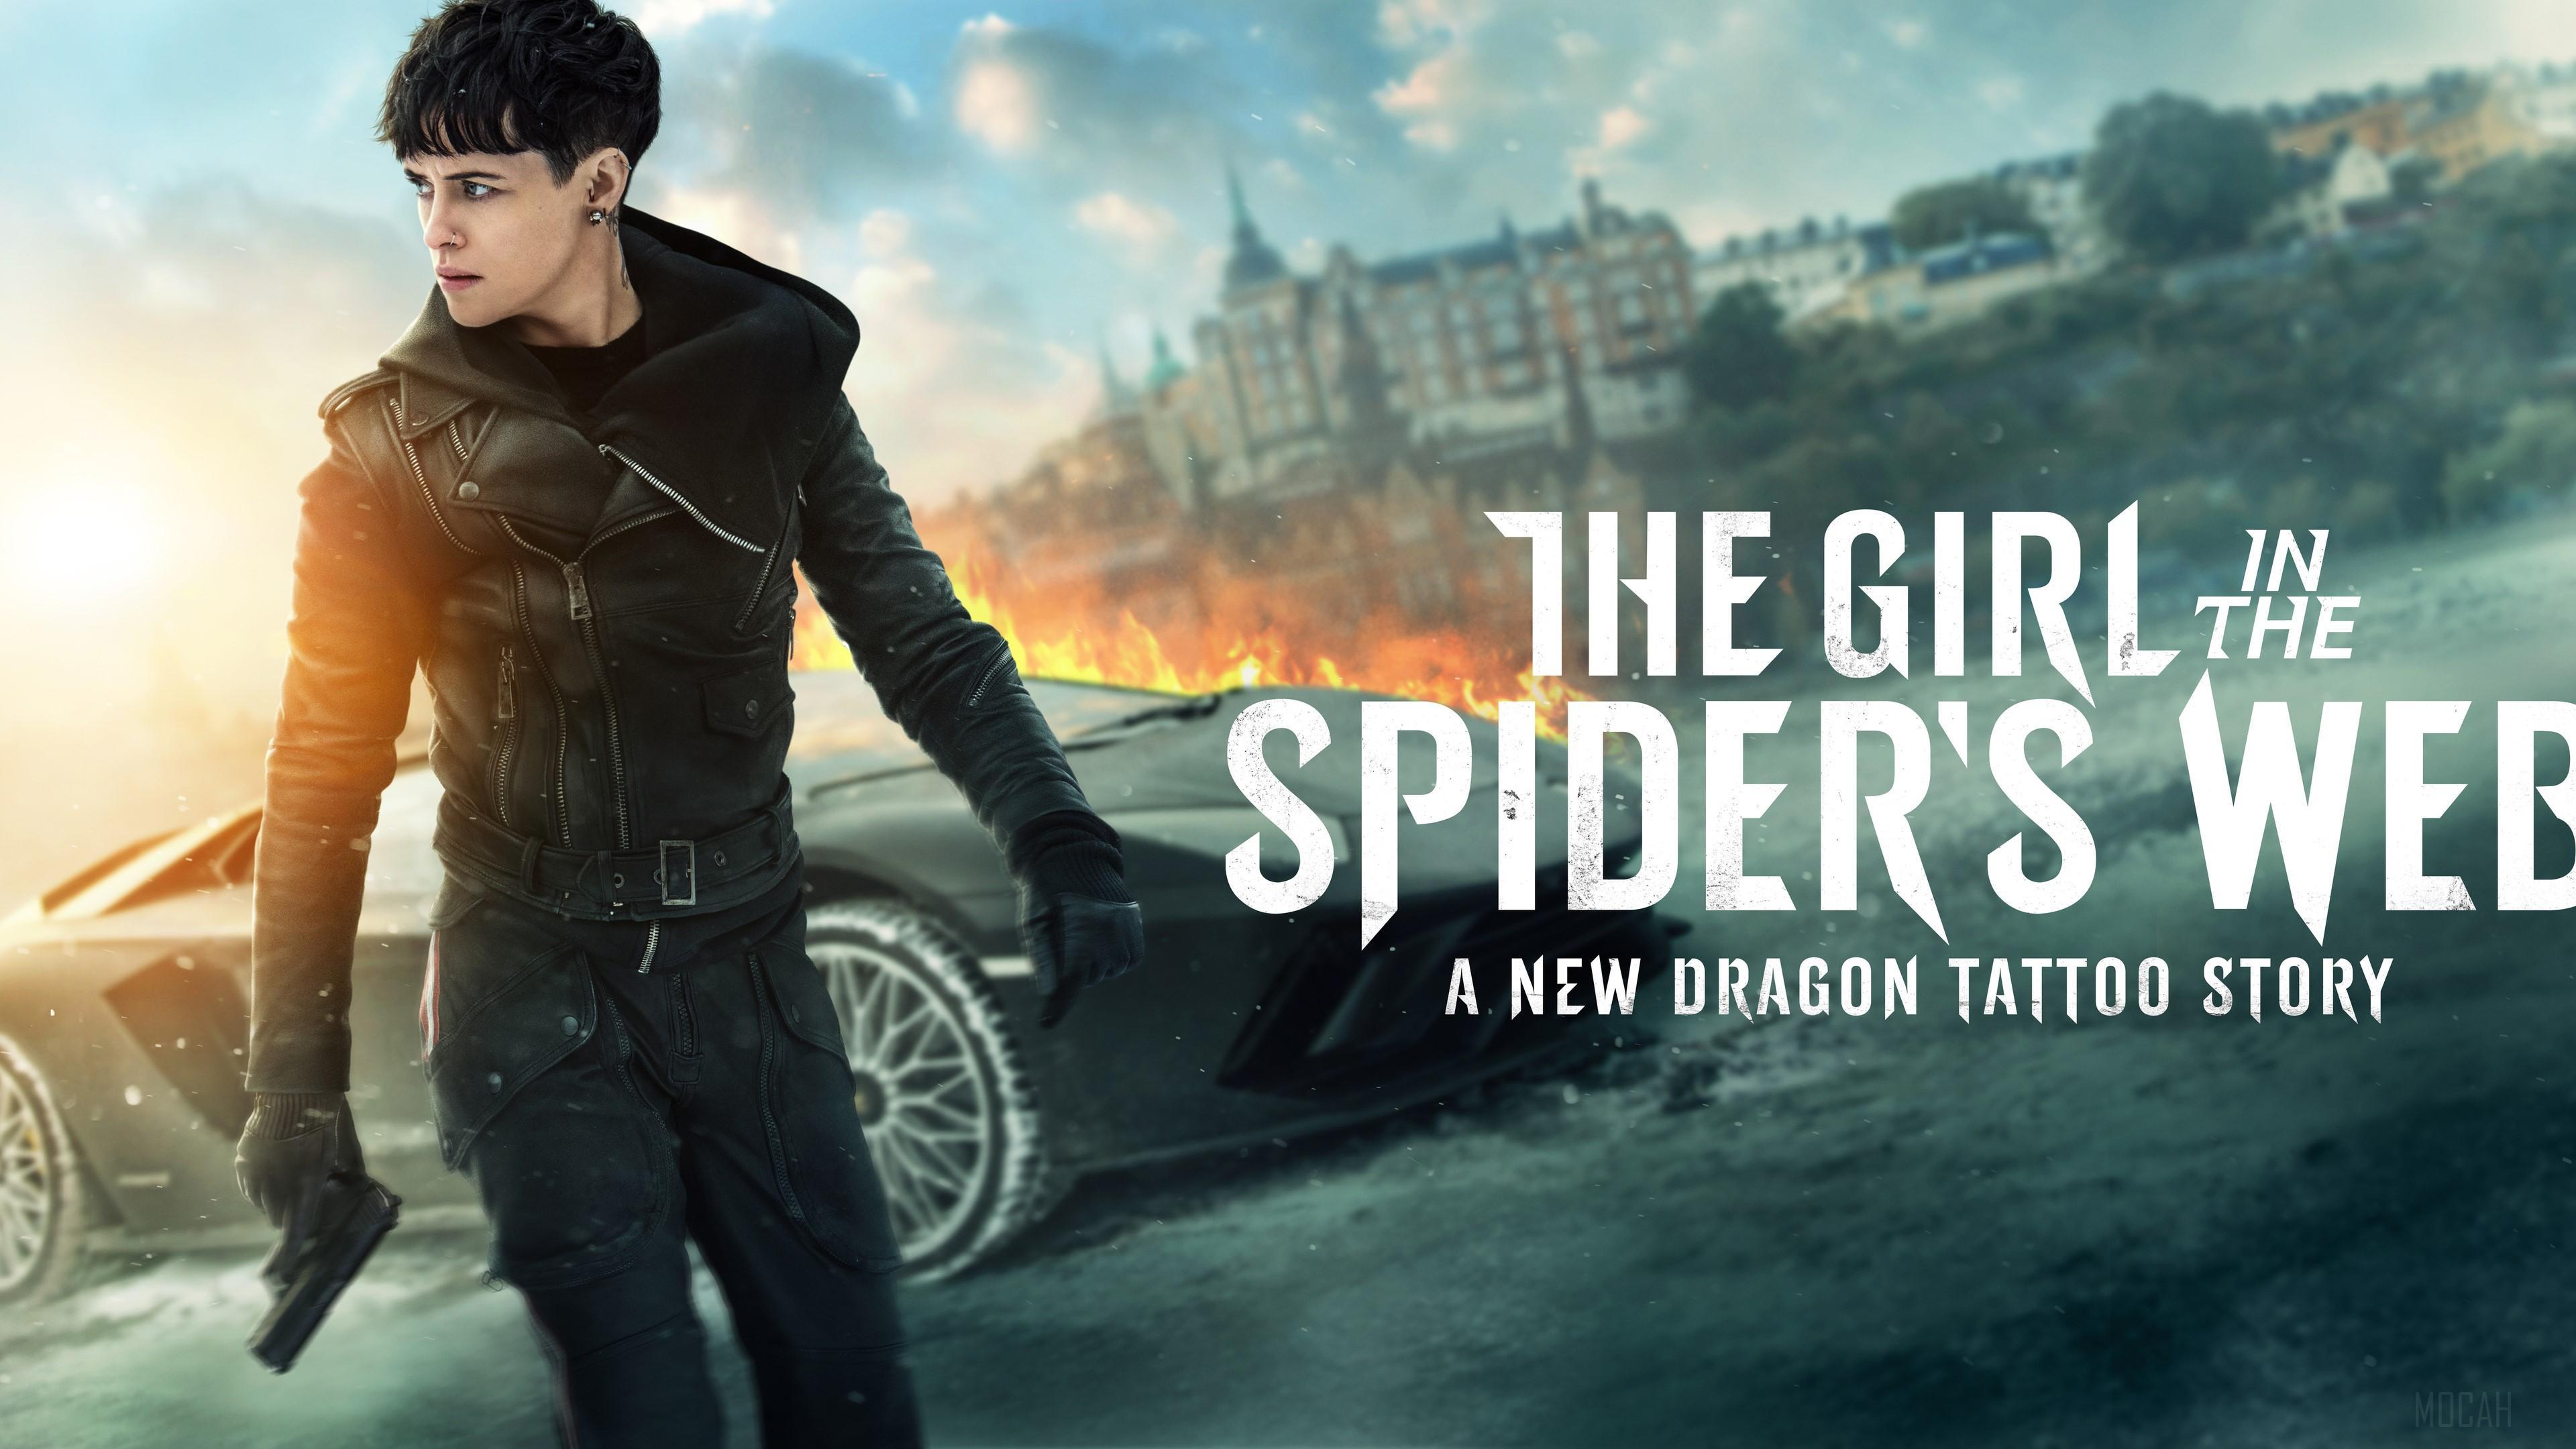 HD wallpaper, 2018 The Girl In The Spiders Web 4K